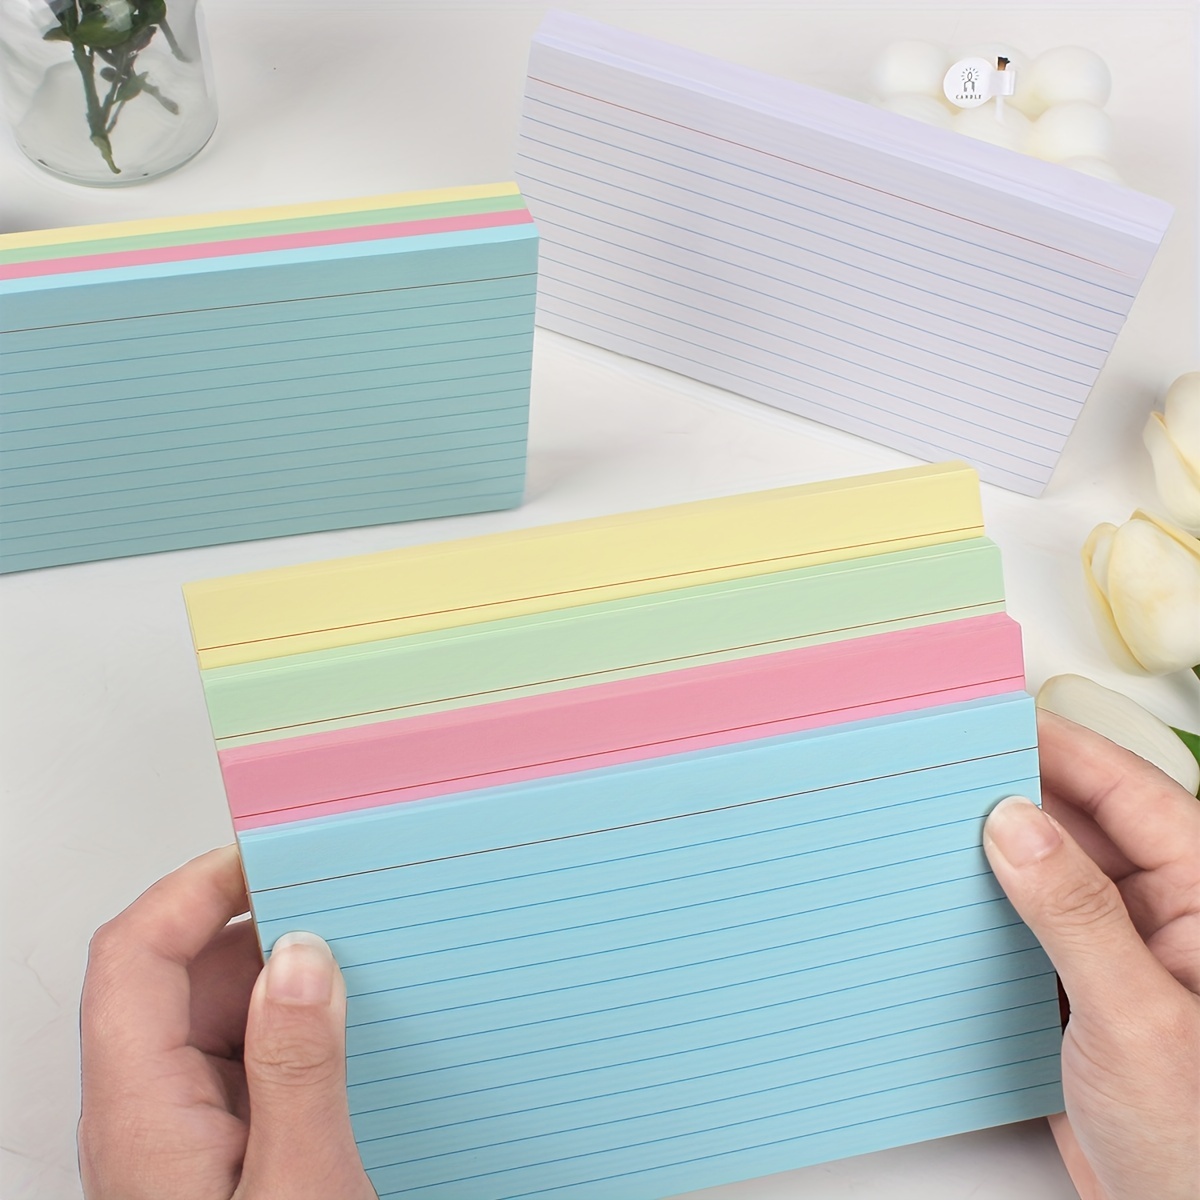  TEHAUX 250 pcs blank card stock cardstock postcard note cards  blank gift card stock printable flash cards invitation card blank flash  cards blank paper cards index card bulk white 